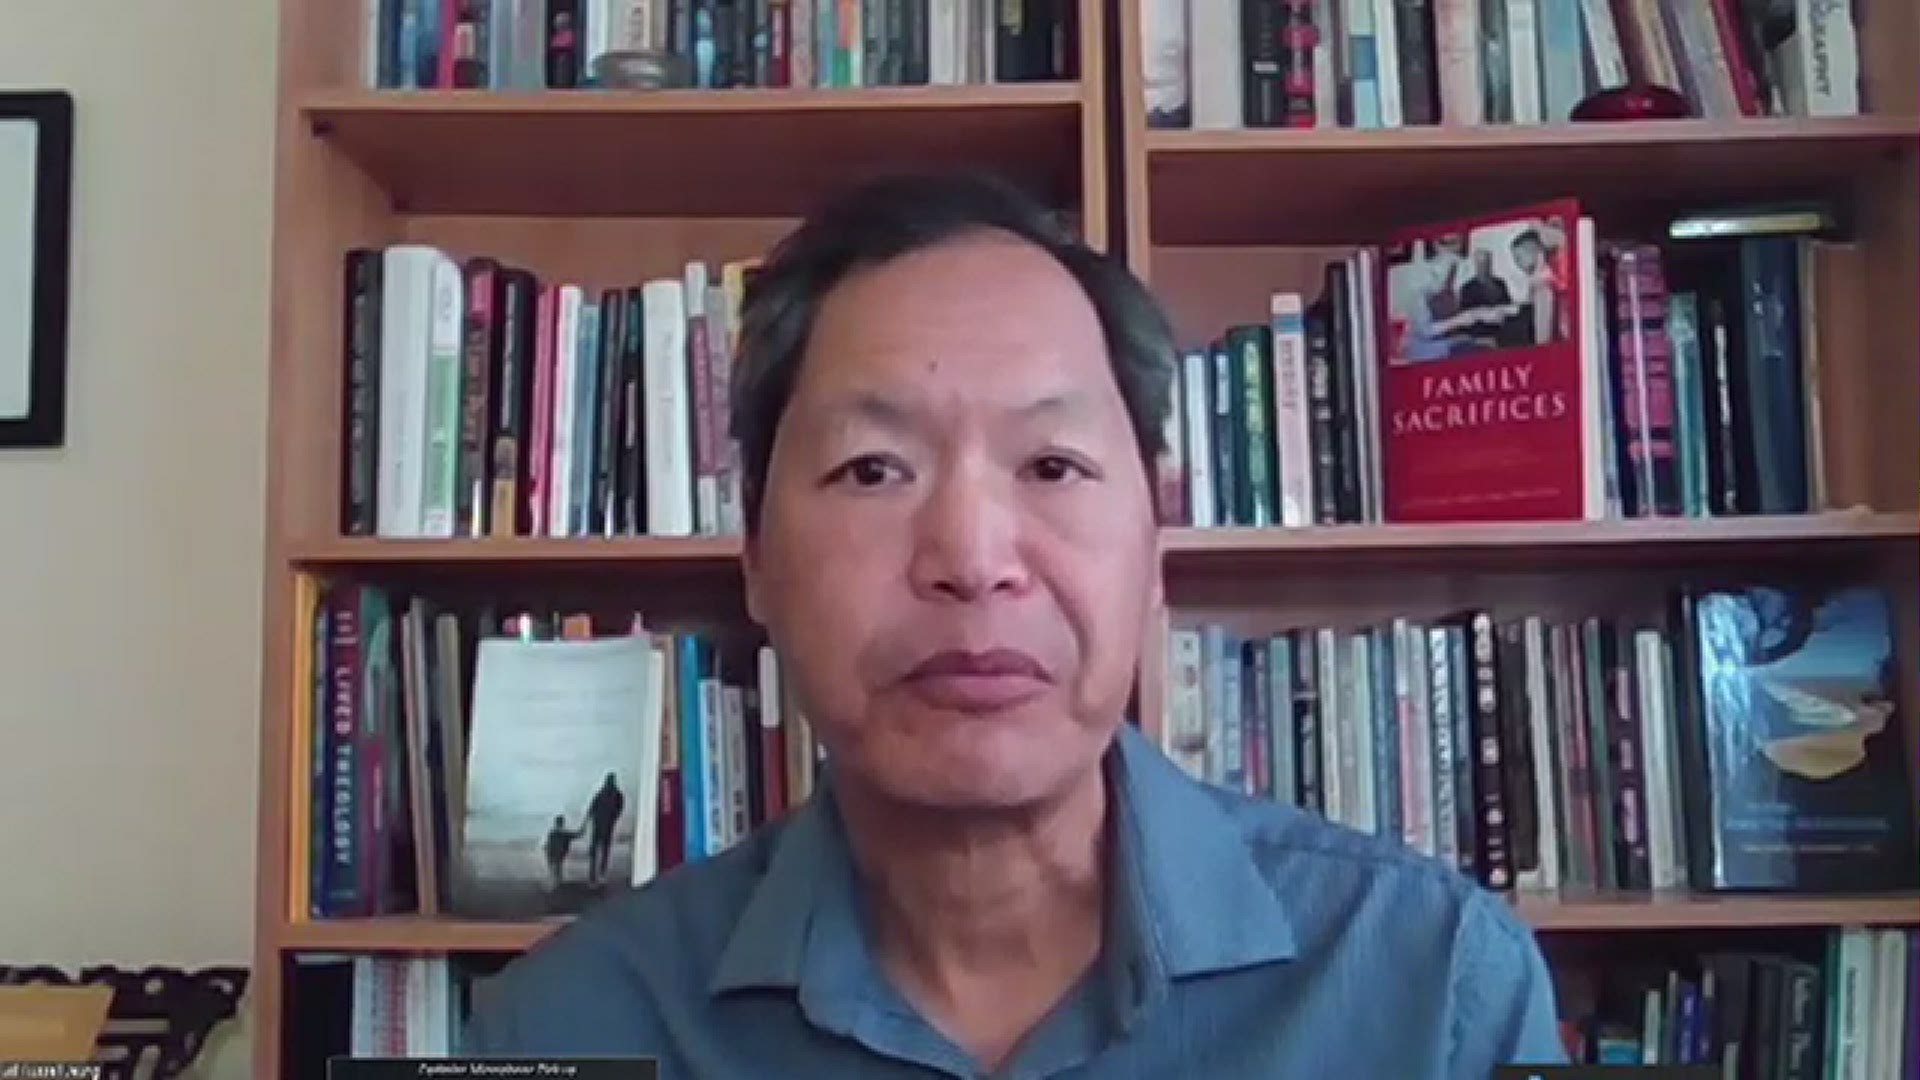 San Francisco State University Professor Dr. Russell Jeung explains the Stop AAPI Hate Project and the challenges that face Asian Americans during COVID-19's spread.